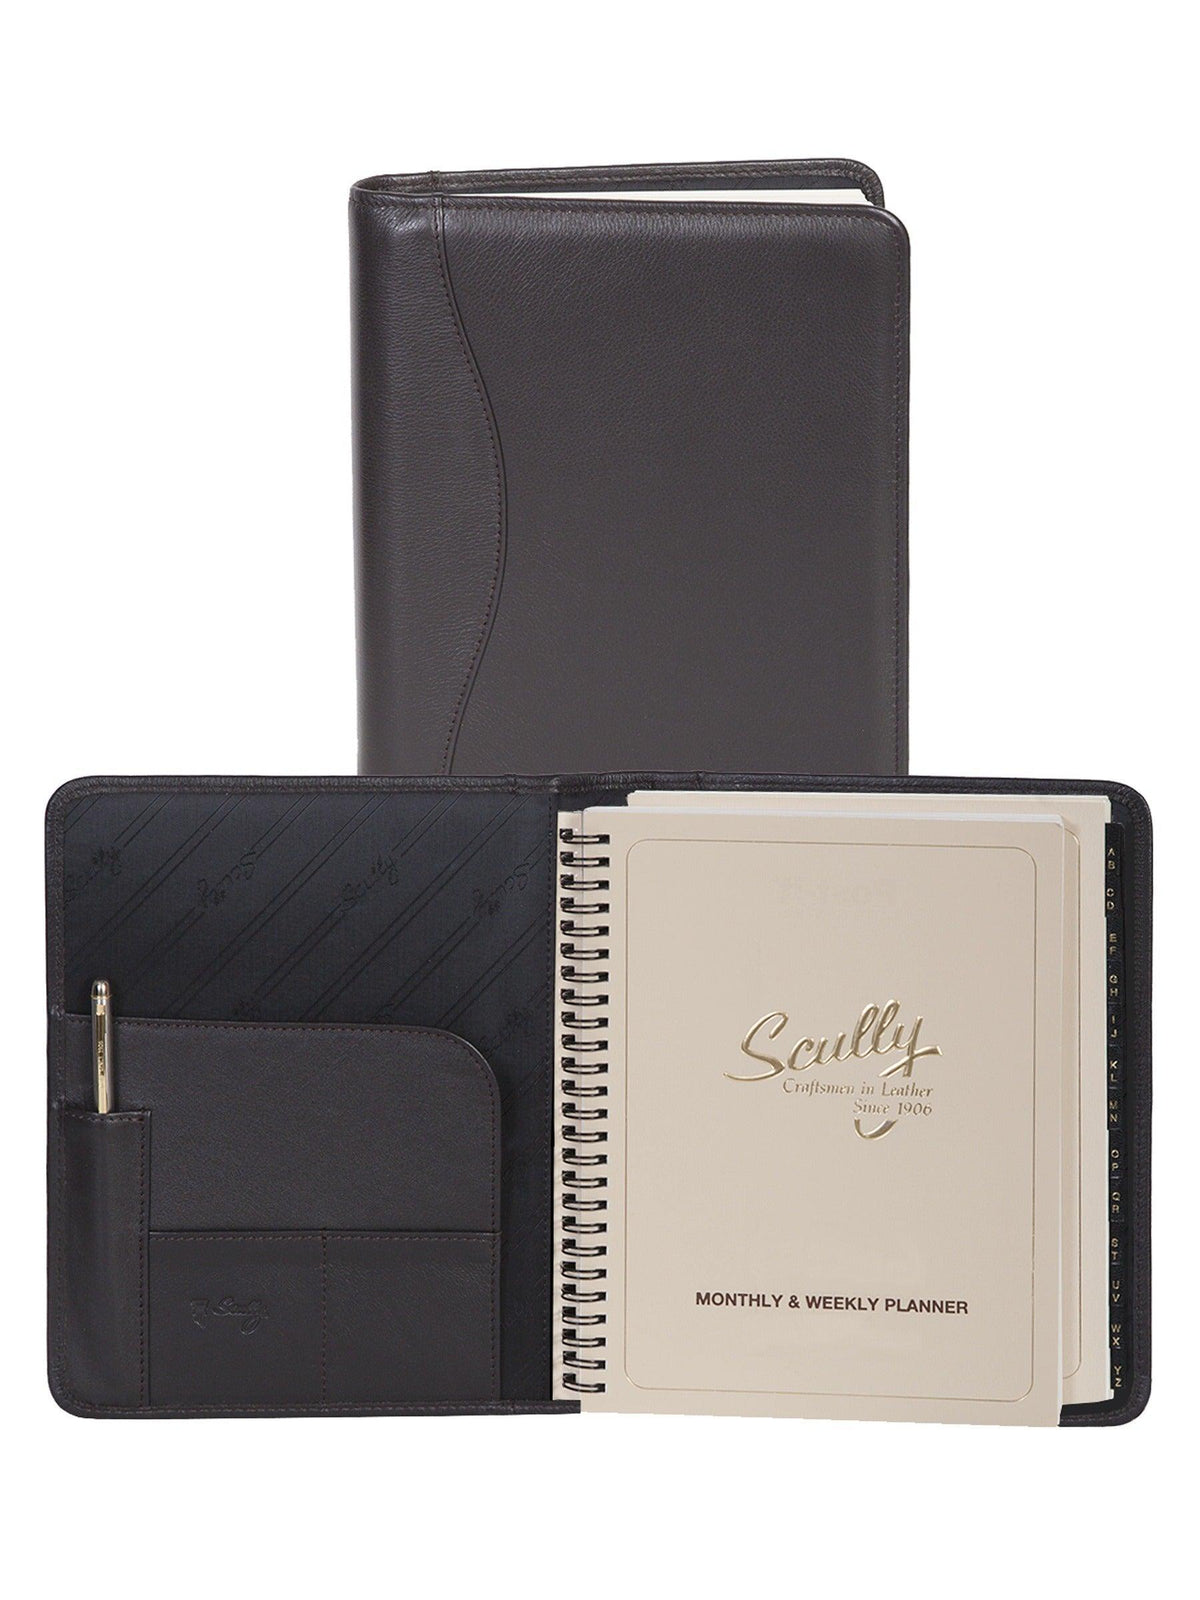 Scully Leather desk size planner - Flyclothing LLC